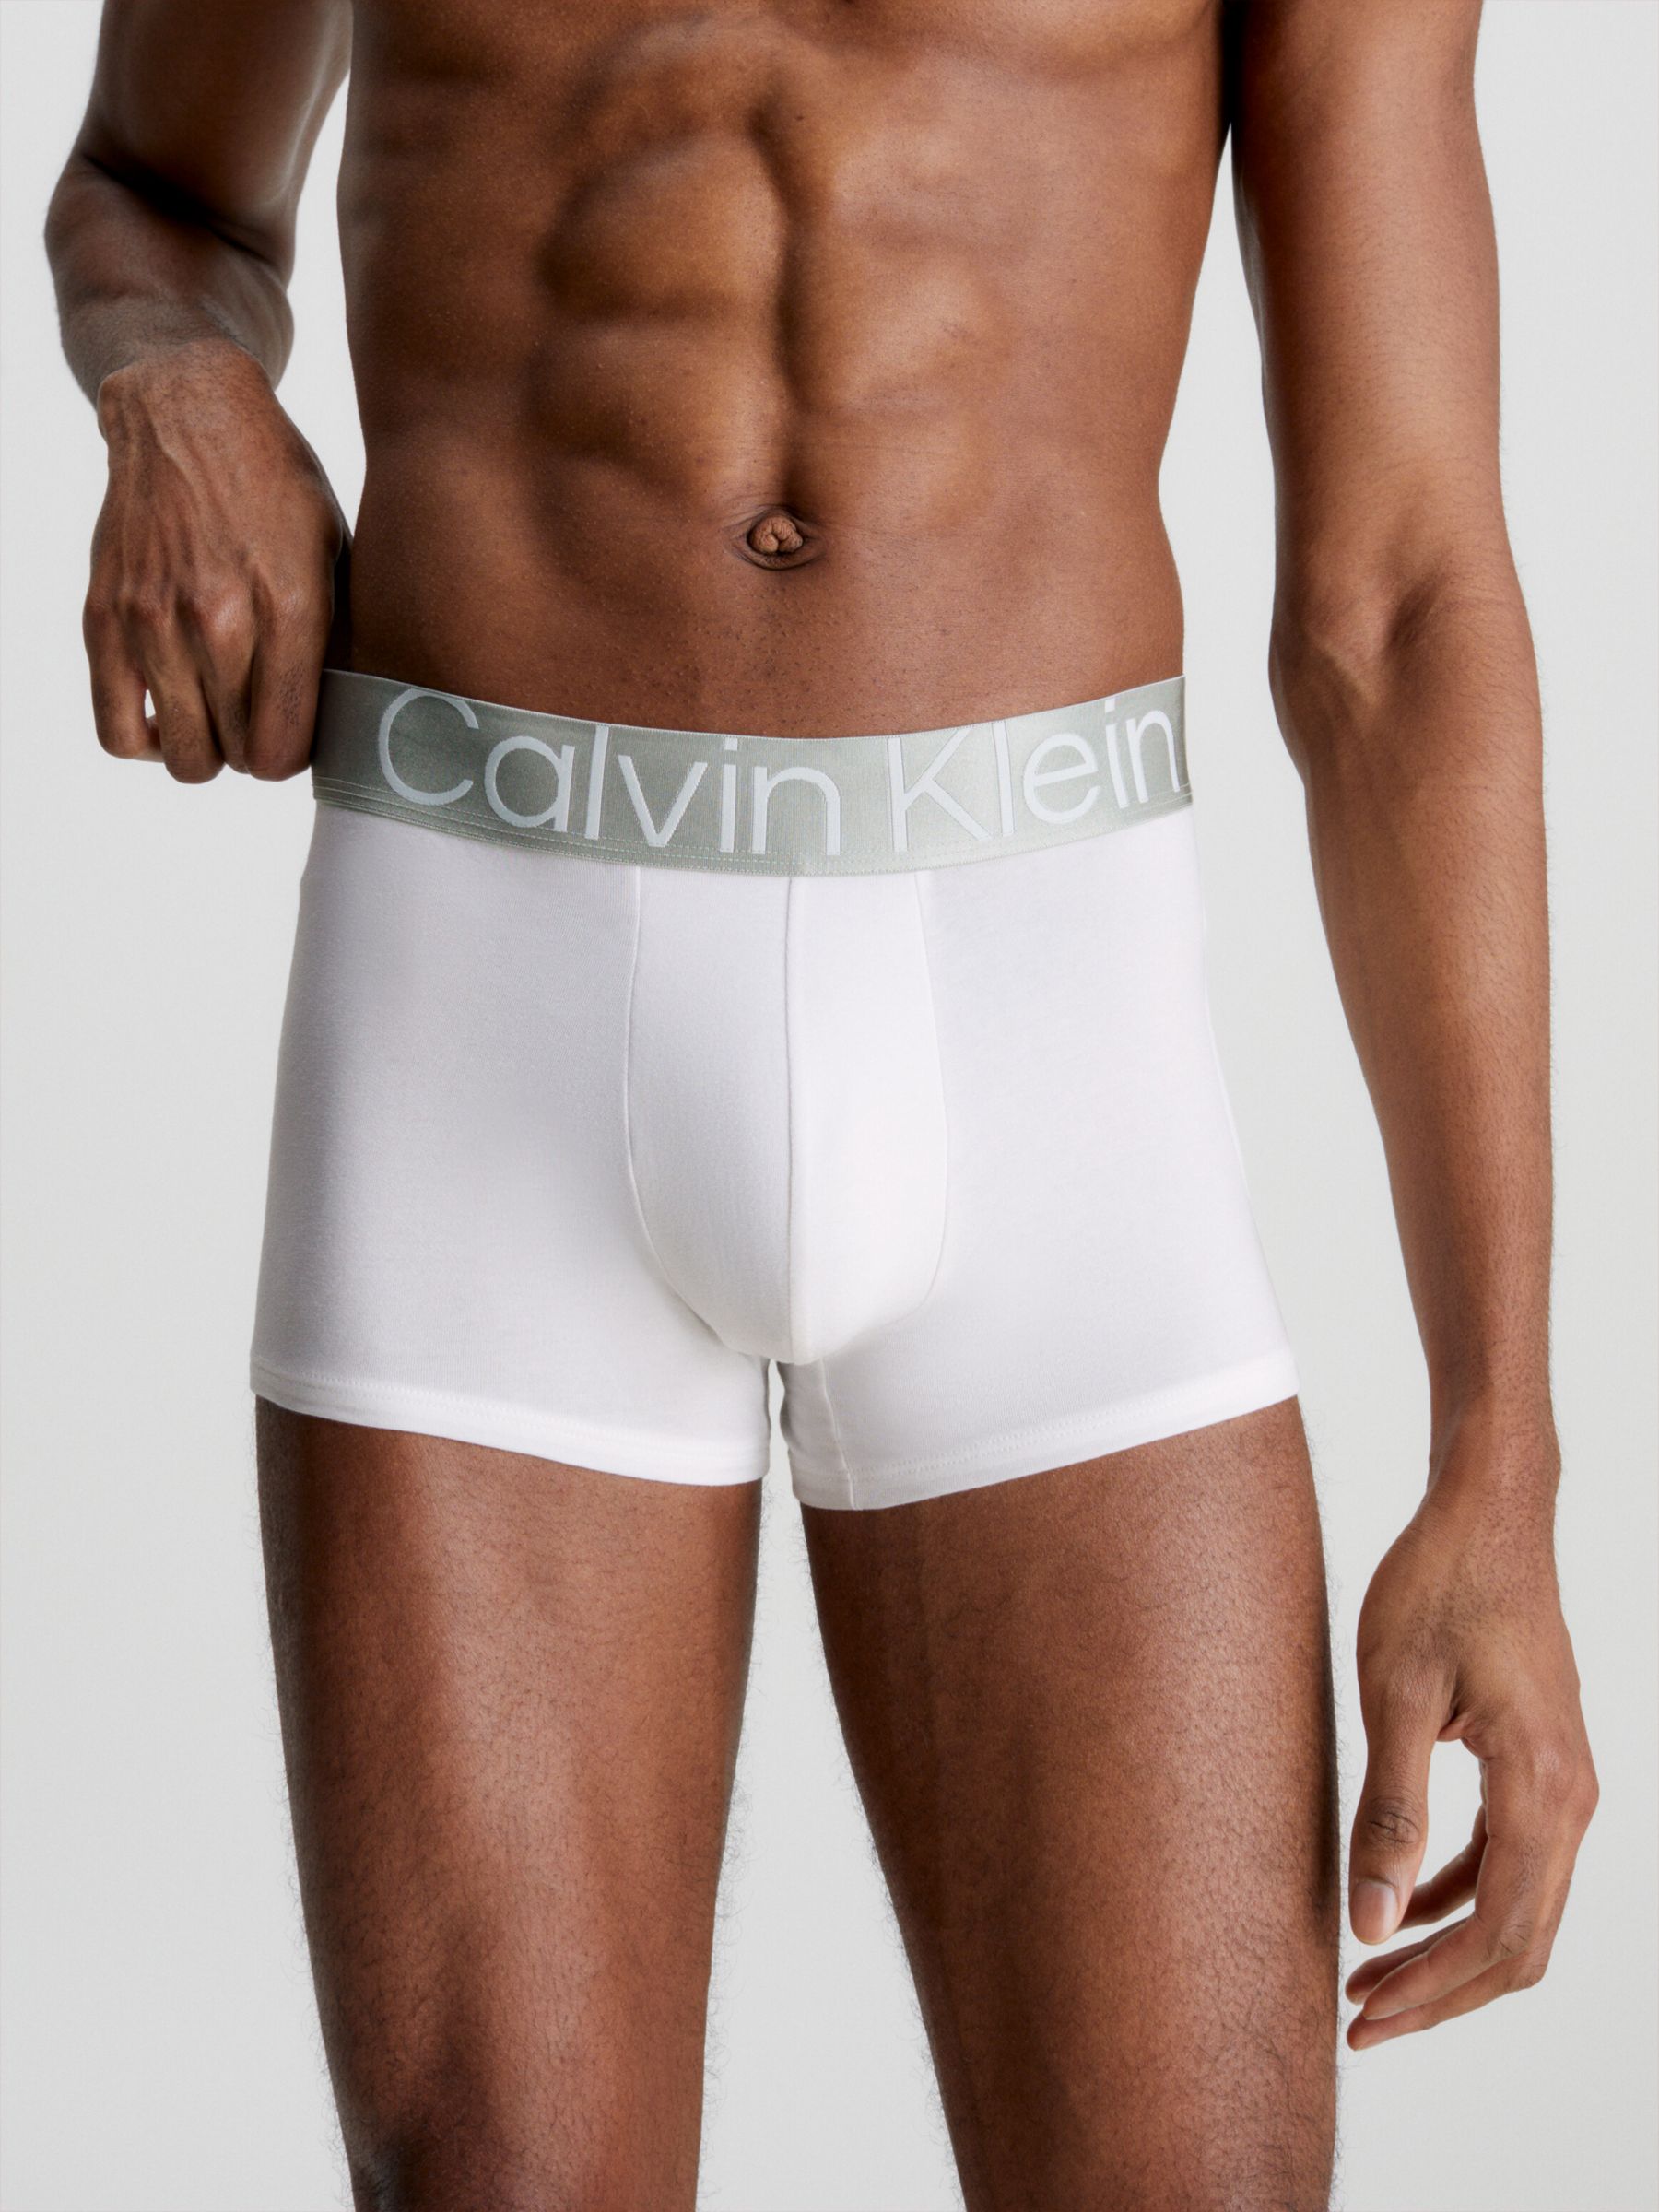 Calvin Klein Recycled Cotton Blend Trunks, Pack of 3, Black/White/Grey ...